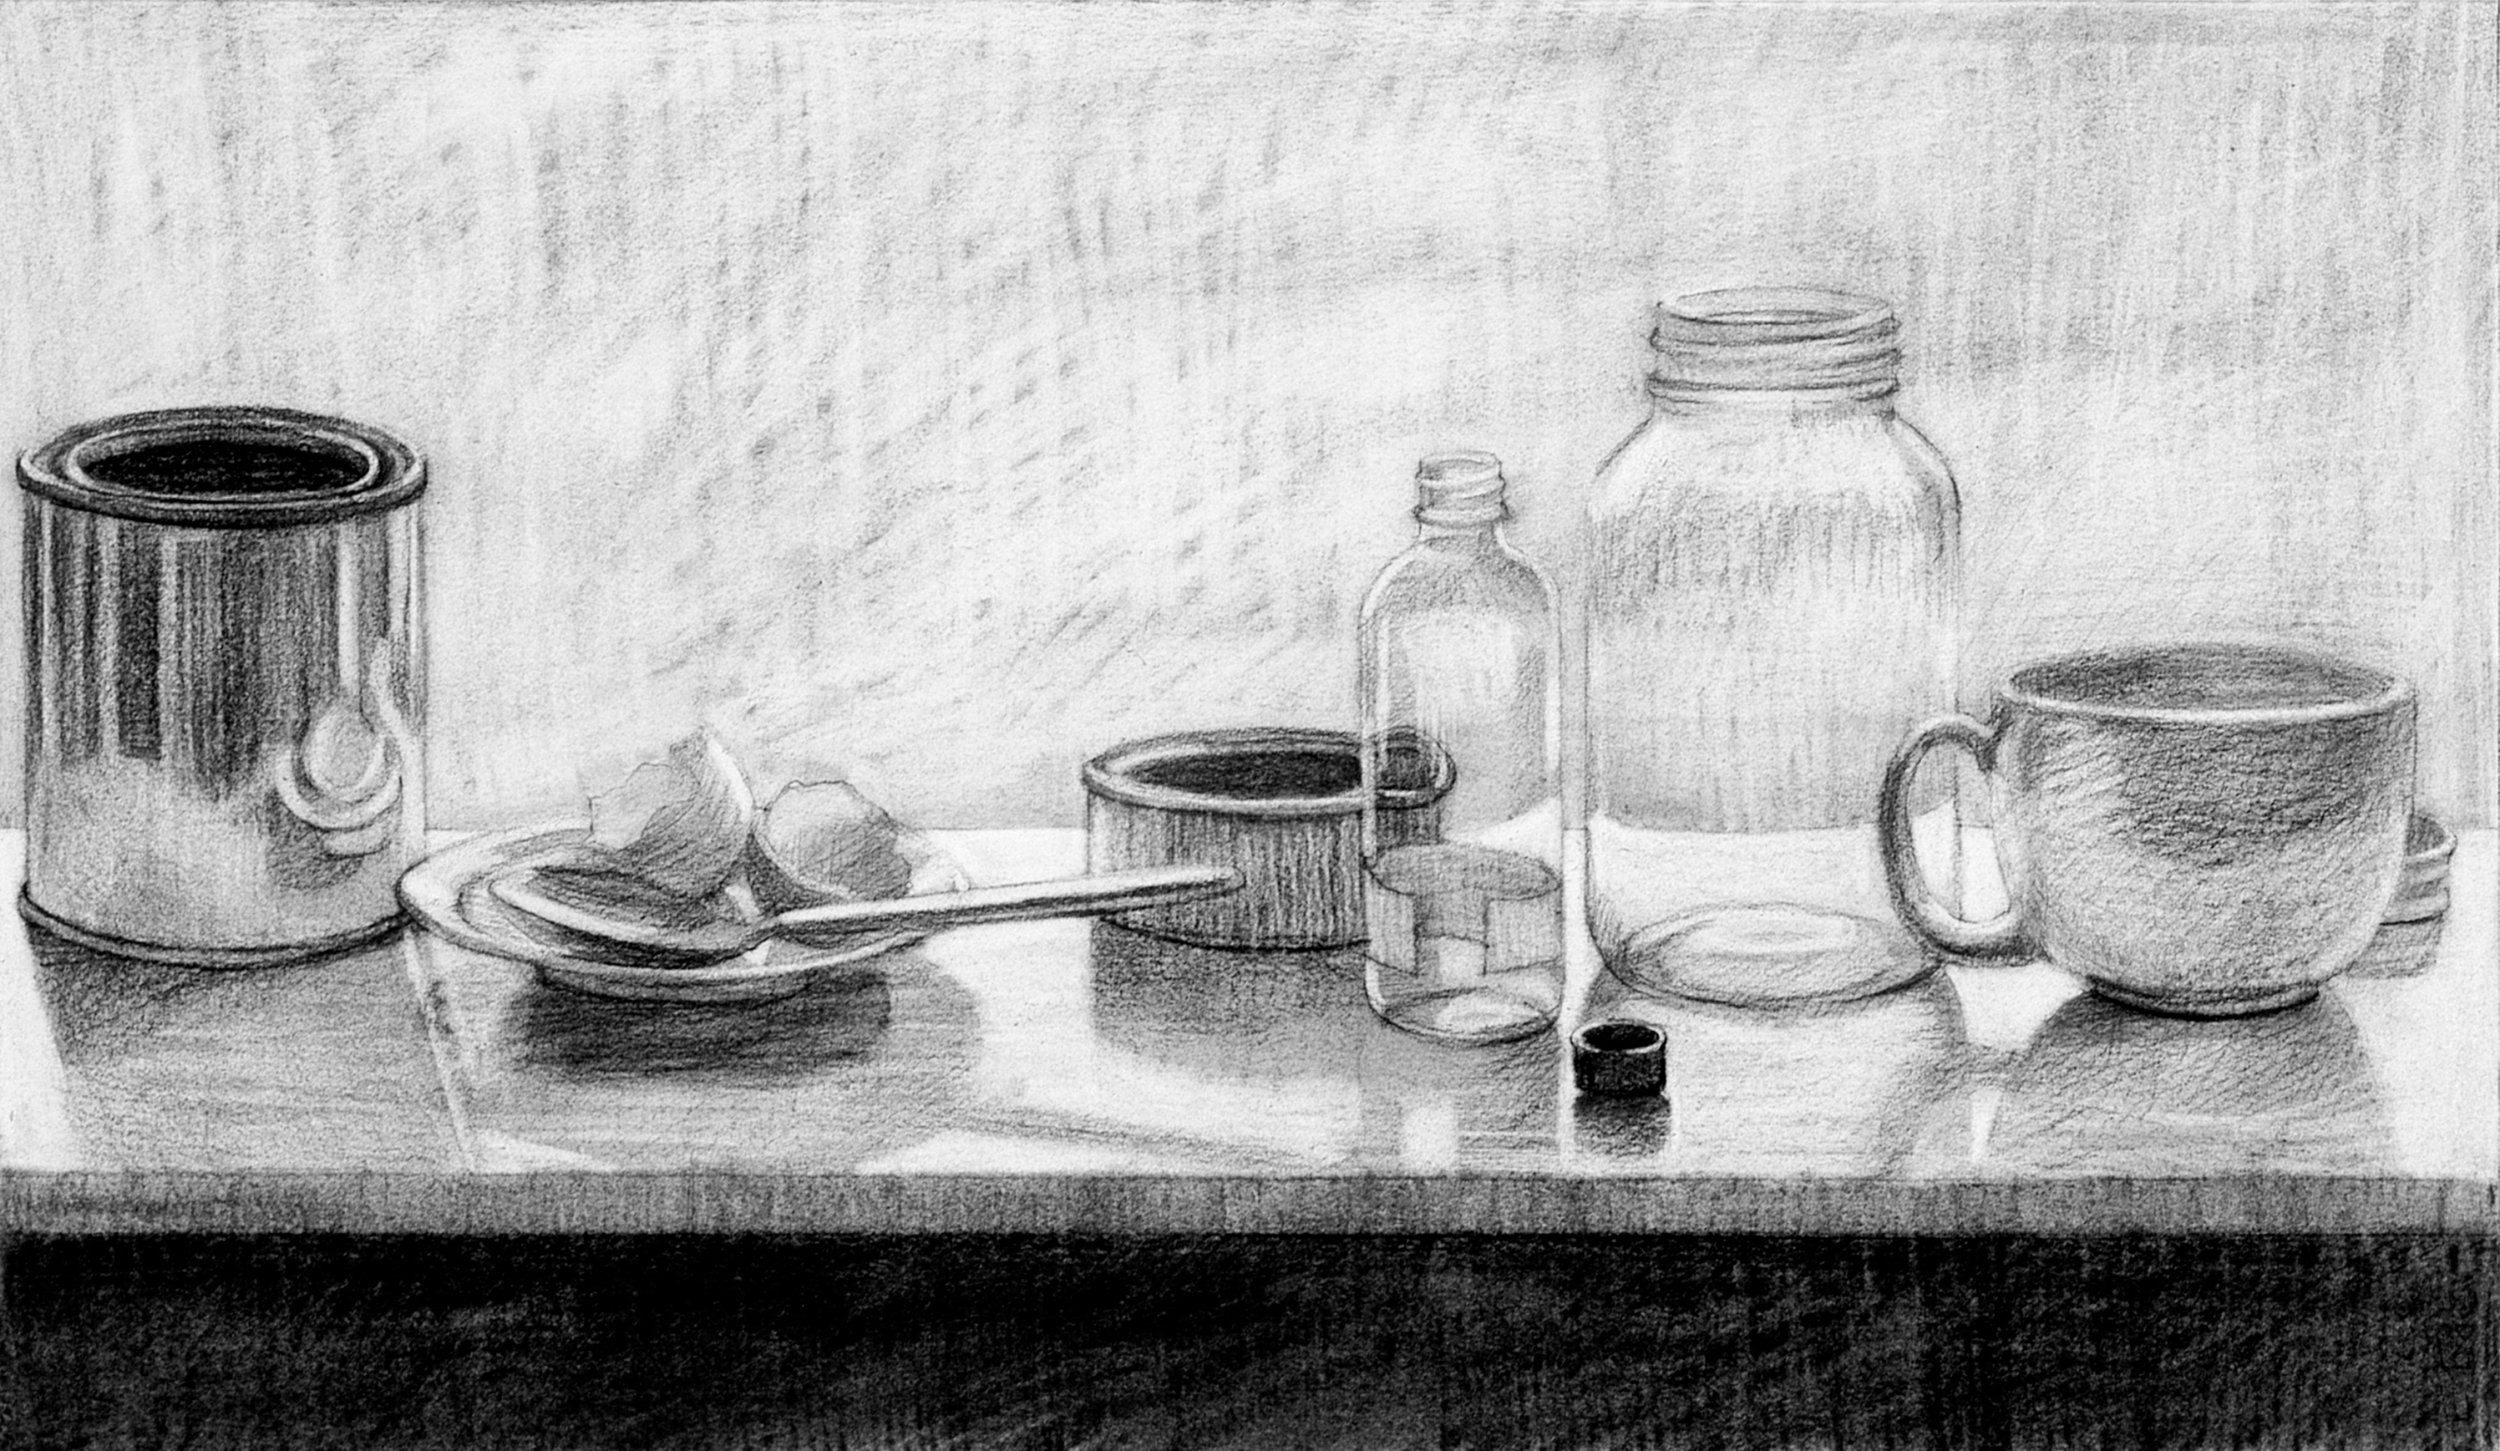 Eder, Containers #2, charcoal, 14 X 24.jpg